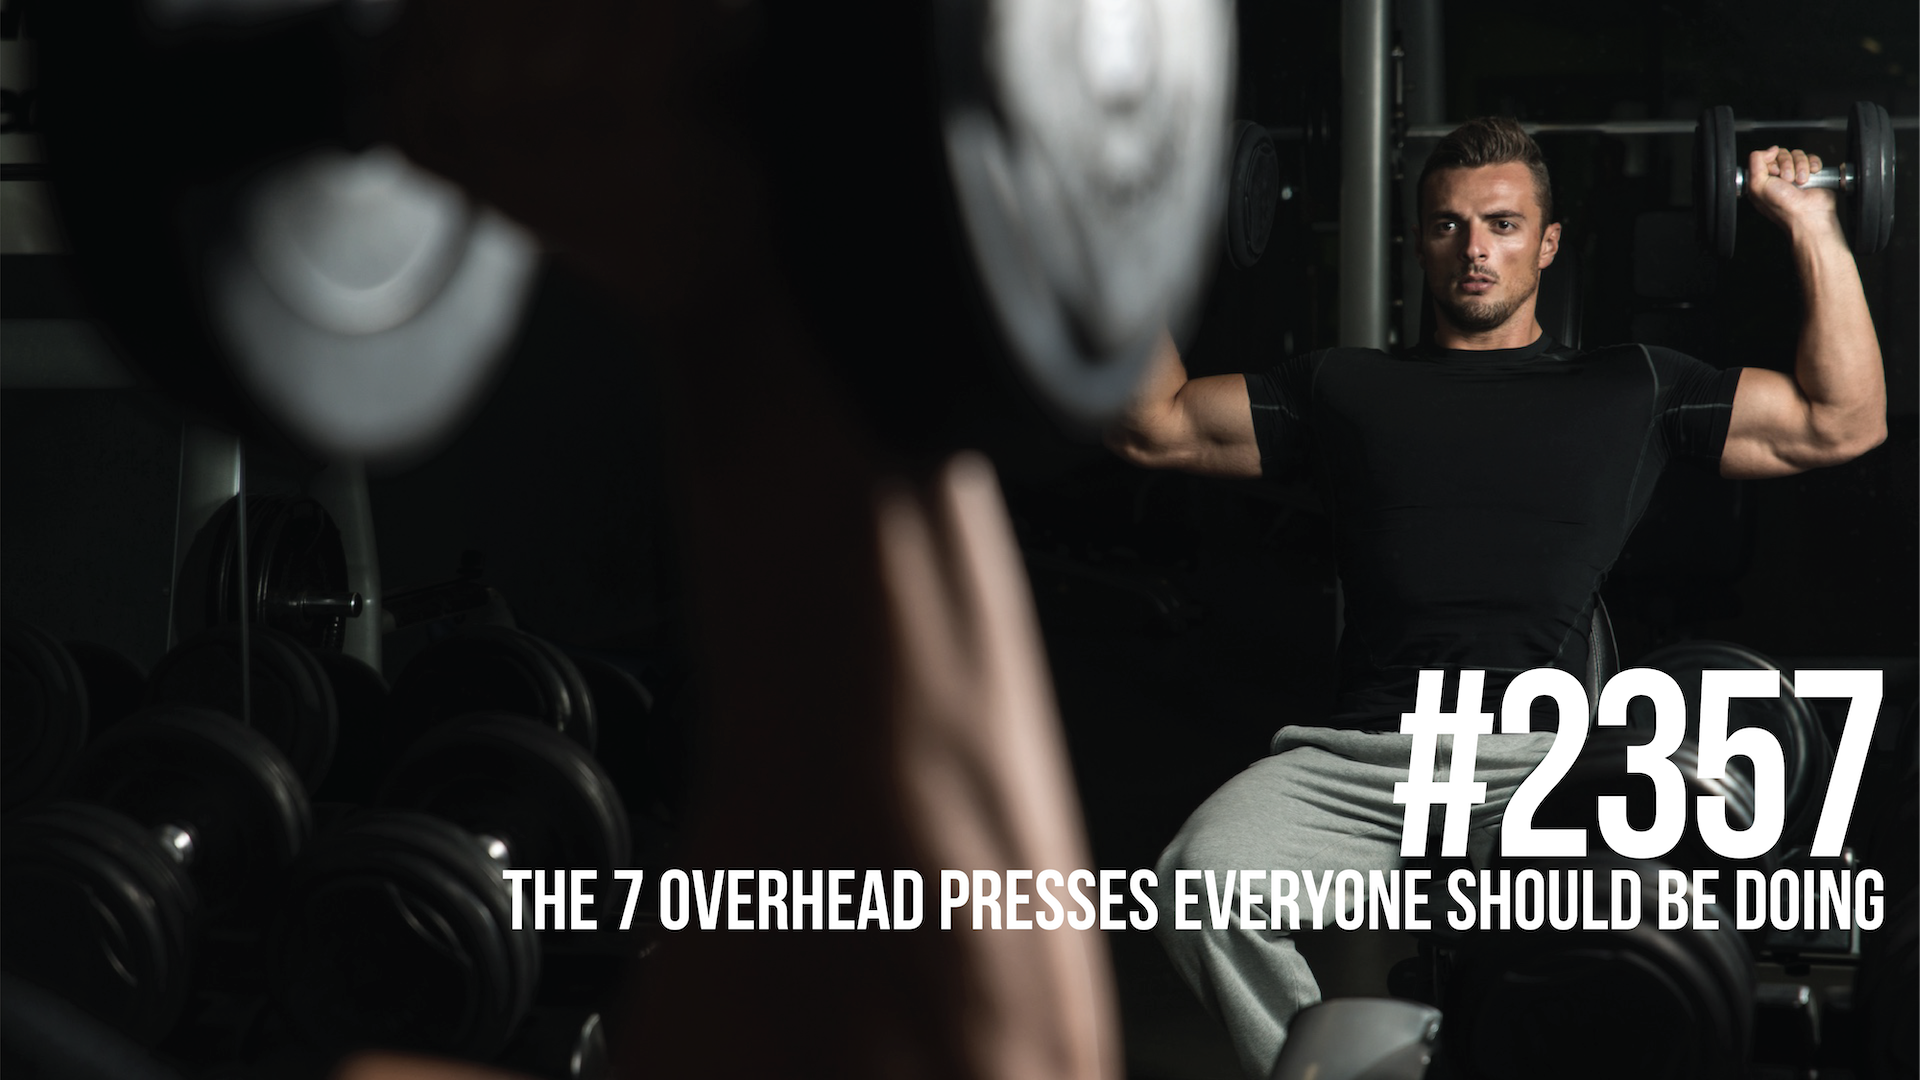 2357: The 7 Overhead Presses Everyone Should Be Doing